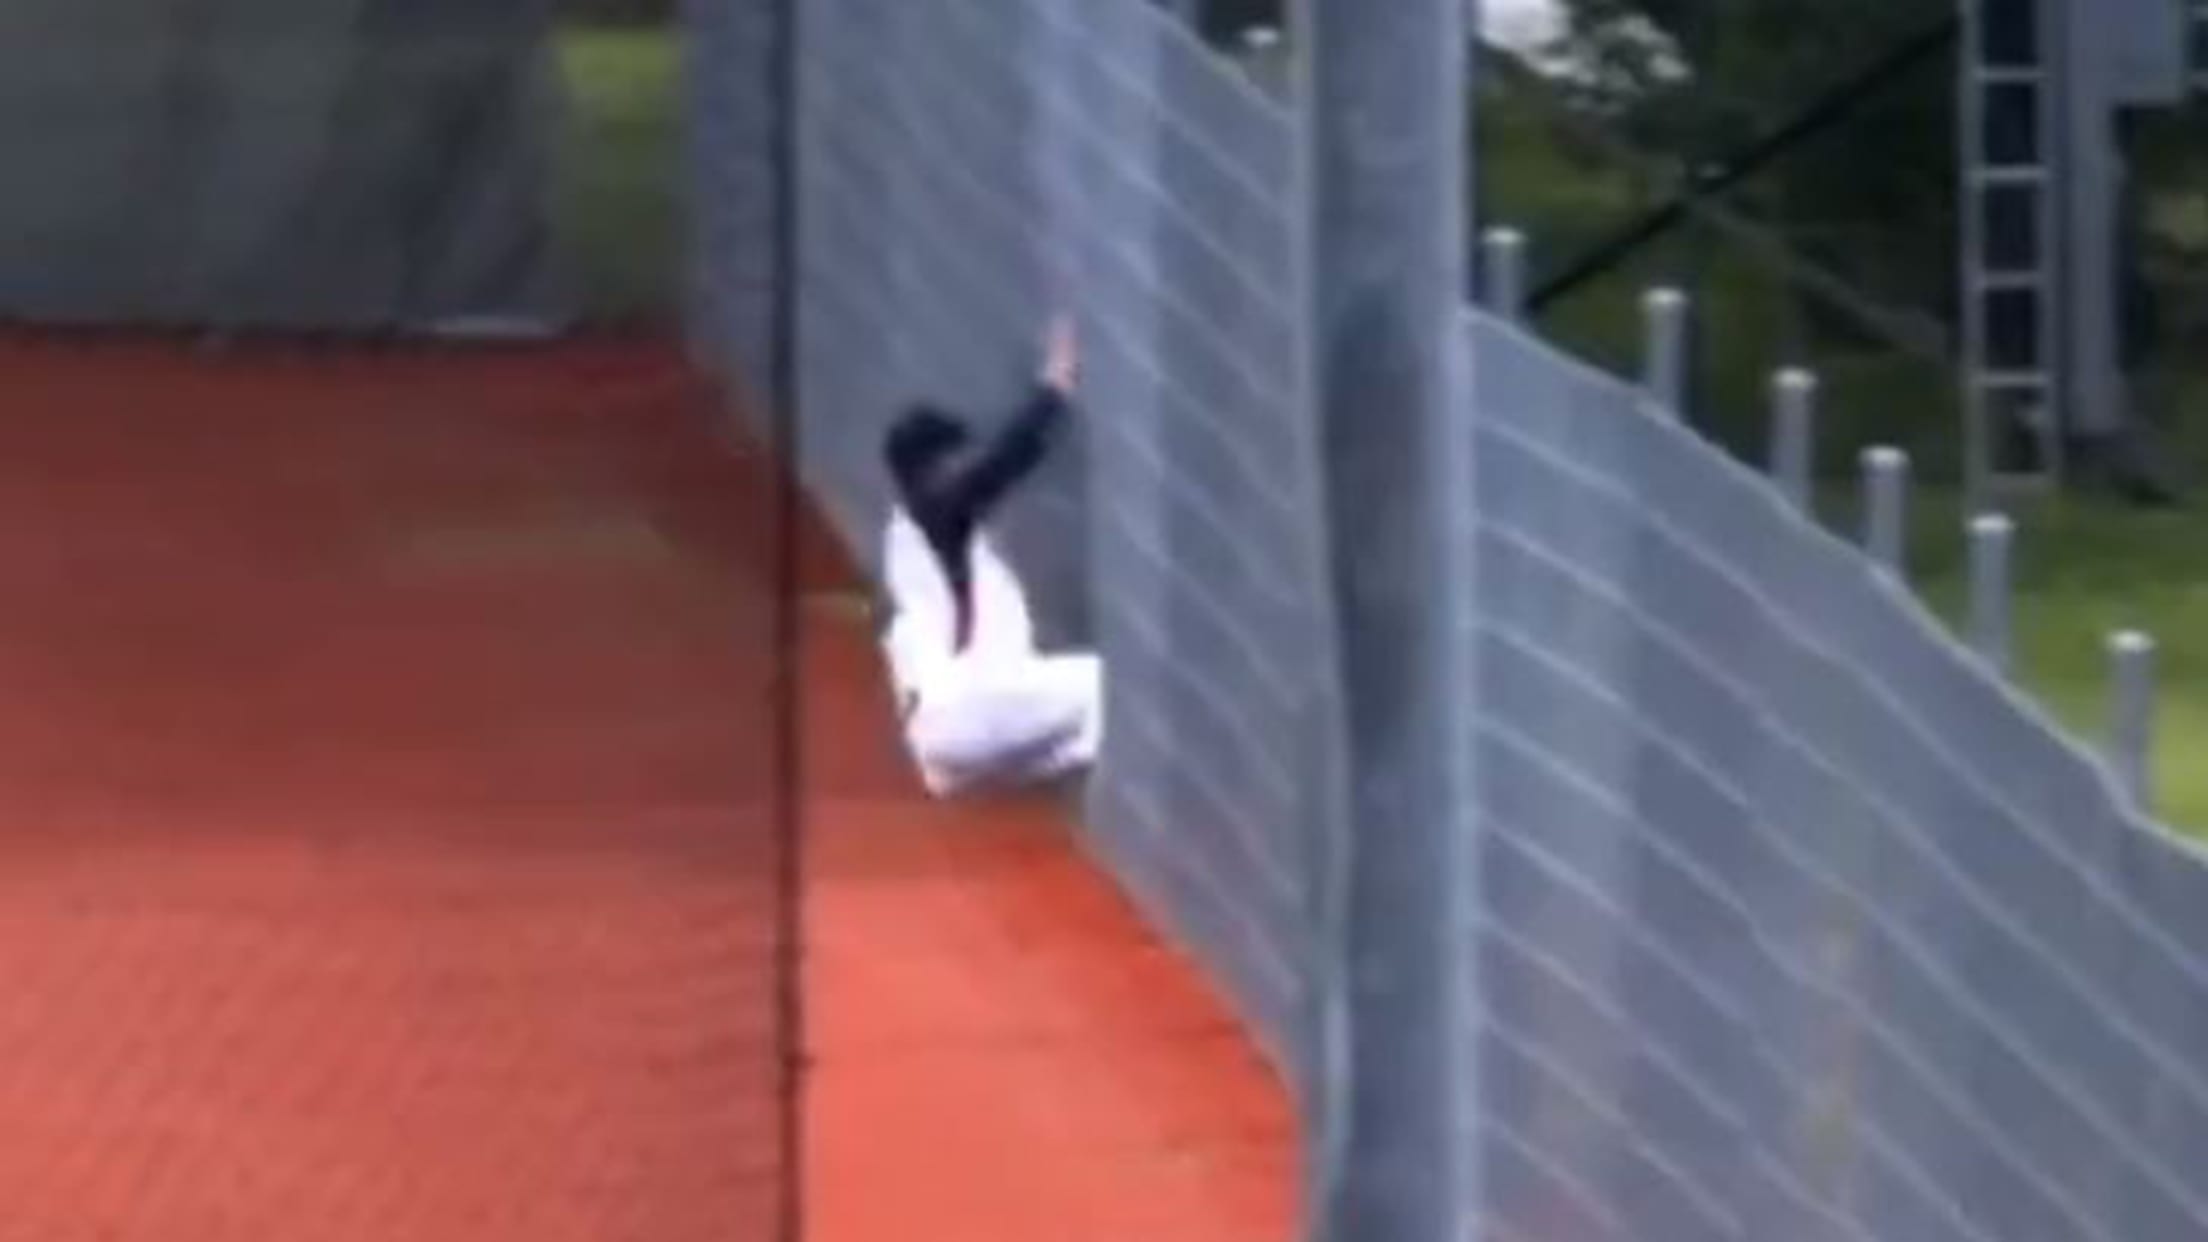 A screengrab of an outfielder sliding into a fence